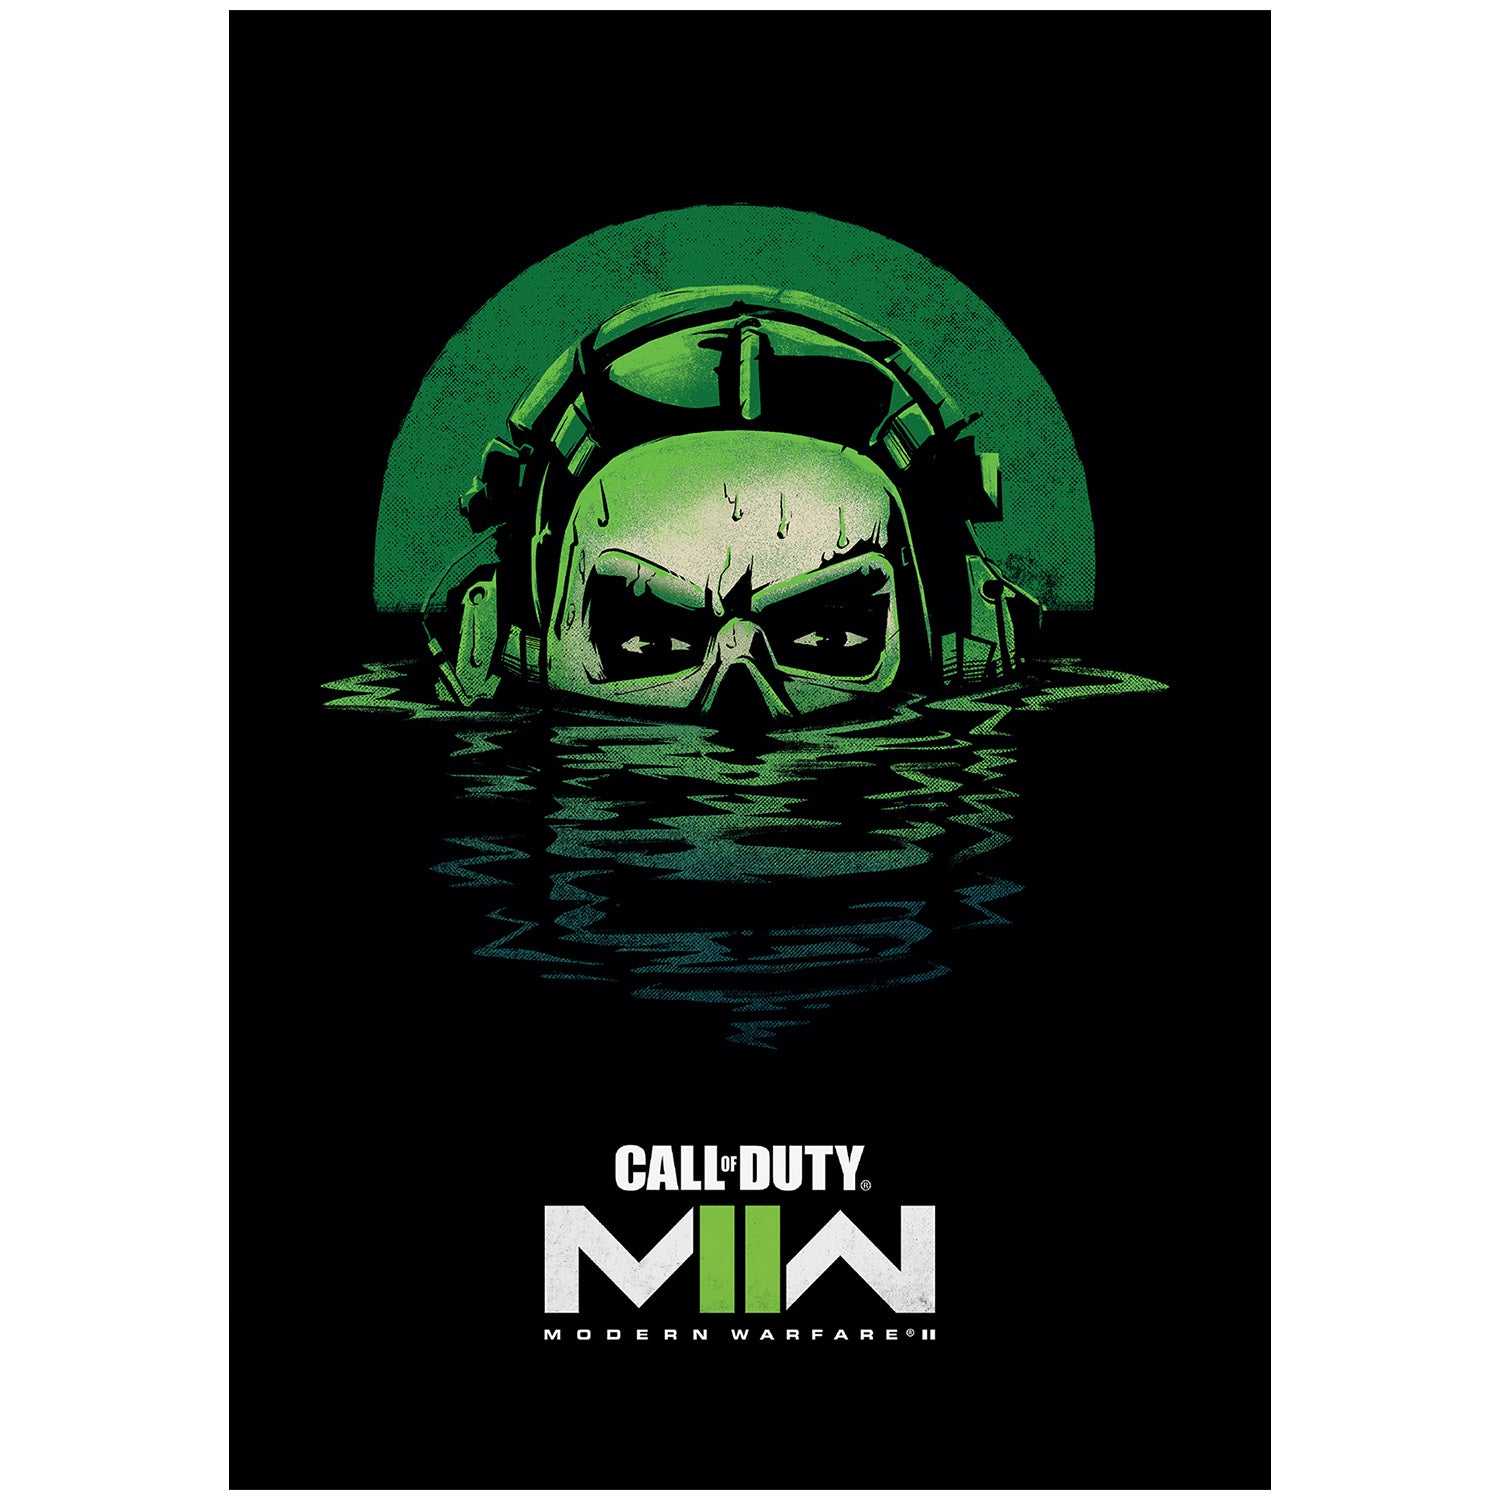 COD Ghosts – Blue Game Poster 22x34 RP13035 UPC882663030354 Call of Du –  Mason City Poster Company